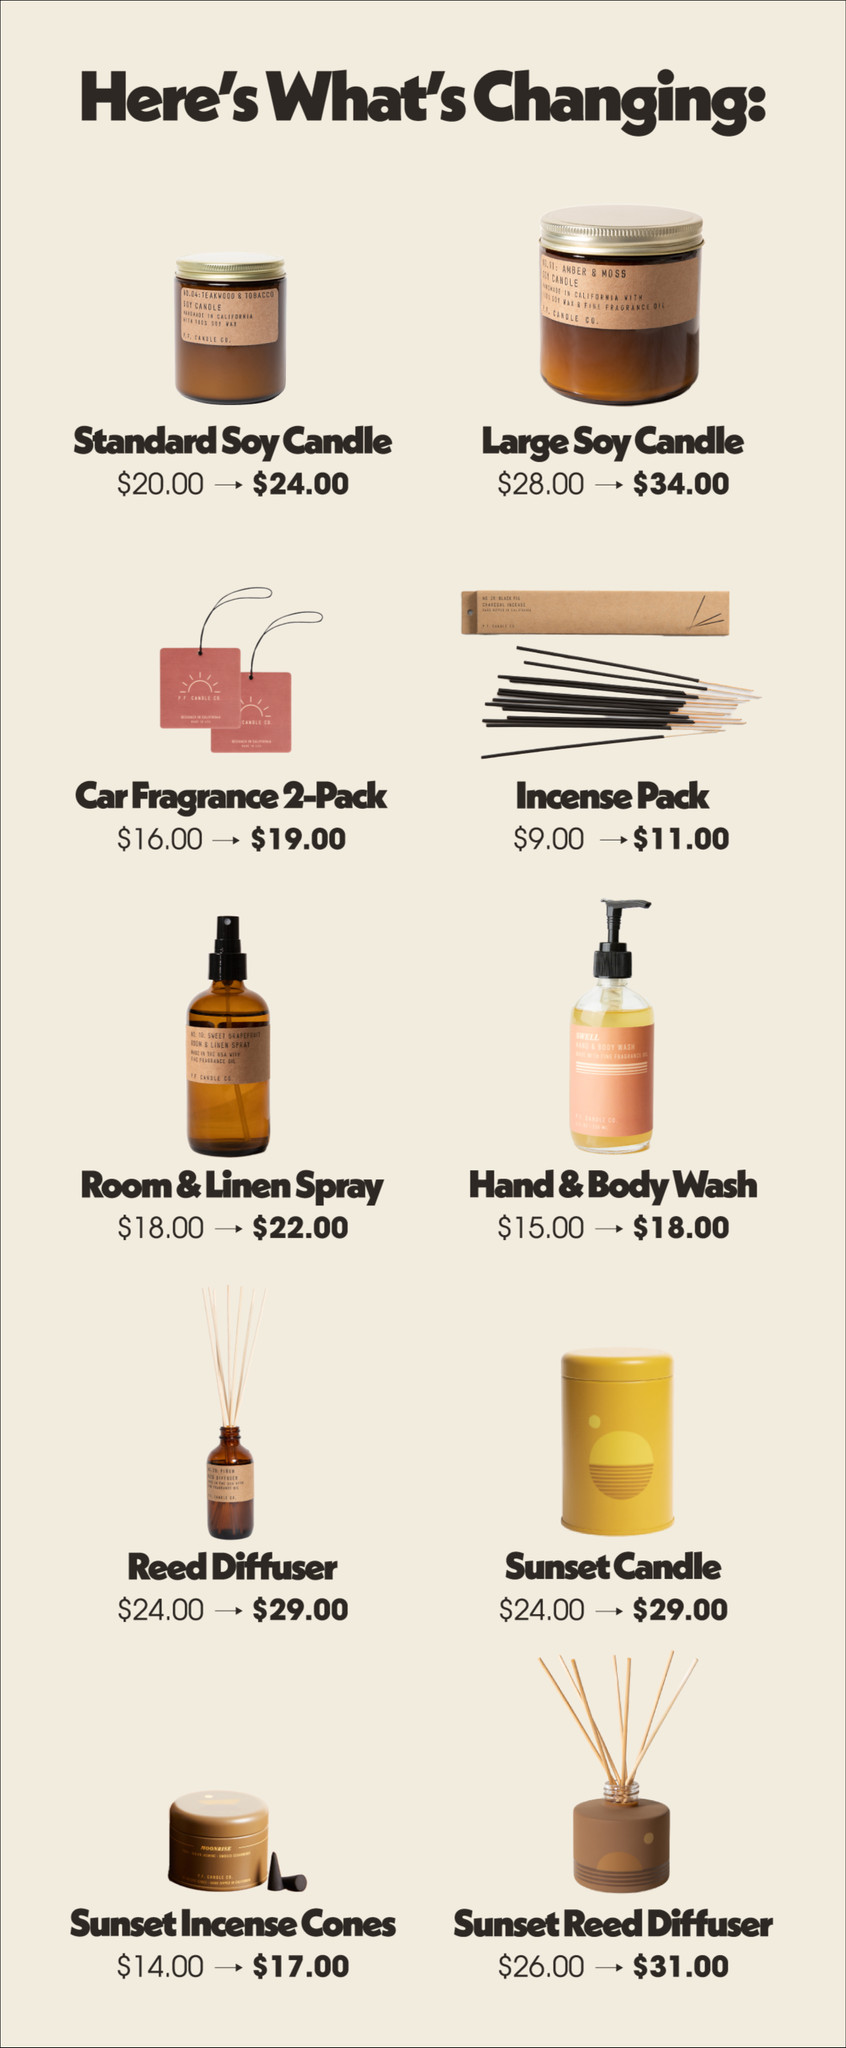 A Note on Prices - Here's What's Changing | Common Scents: The P.F. Candle Co. Blog